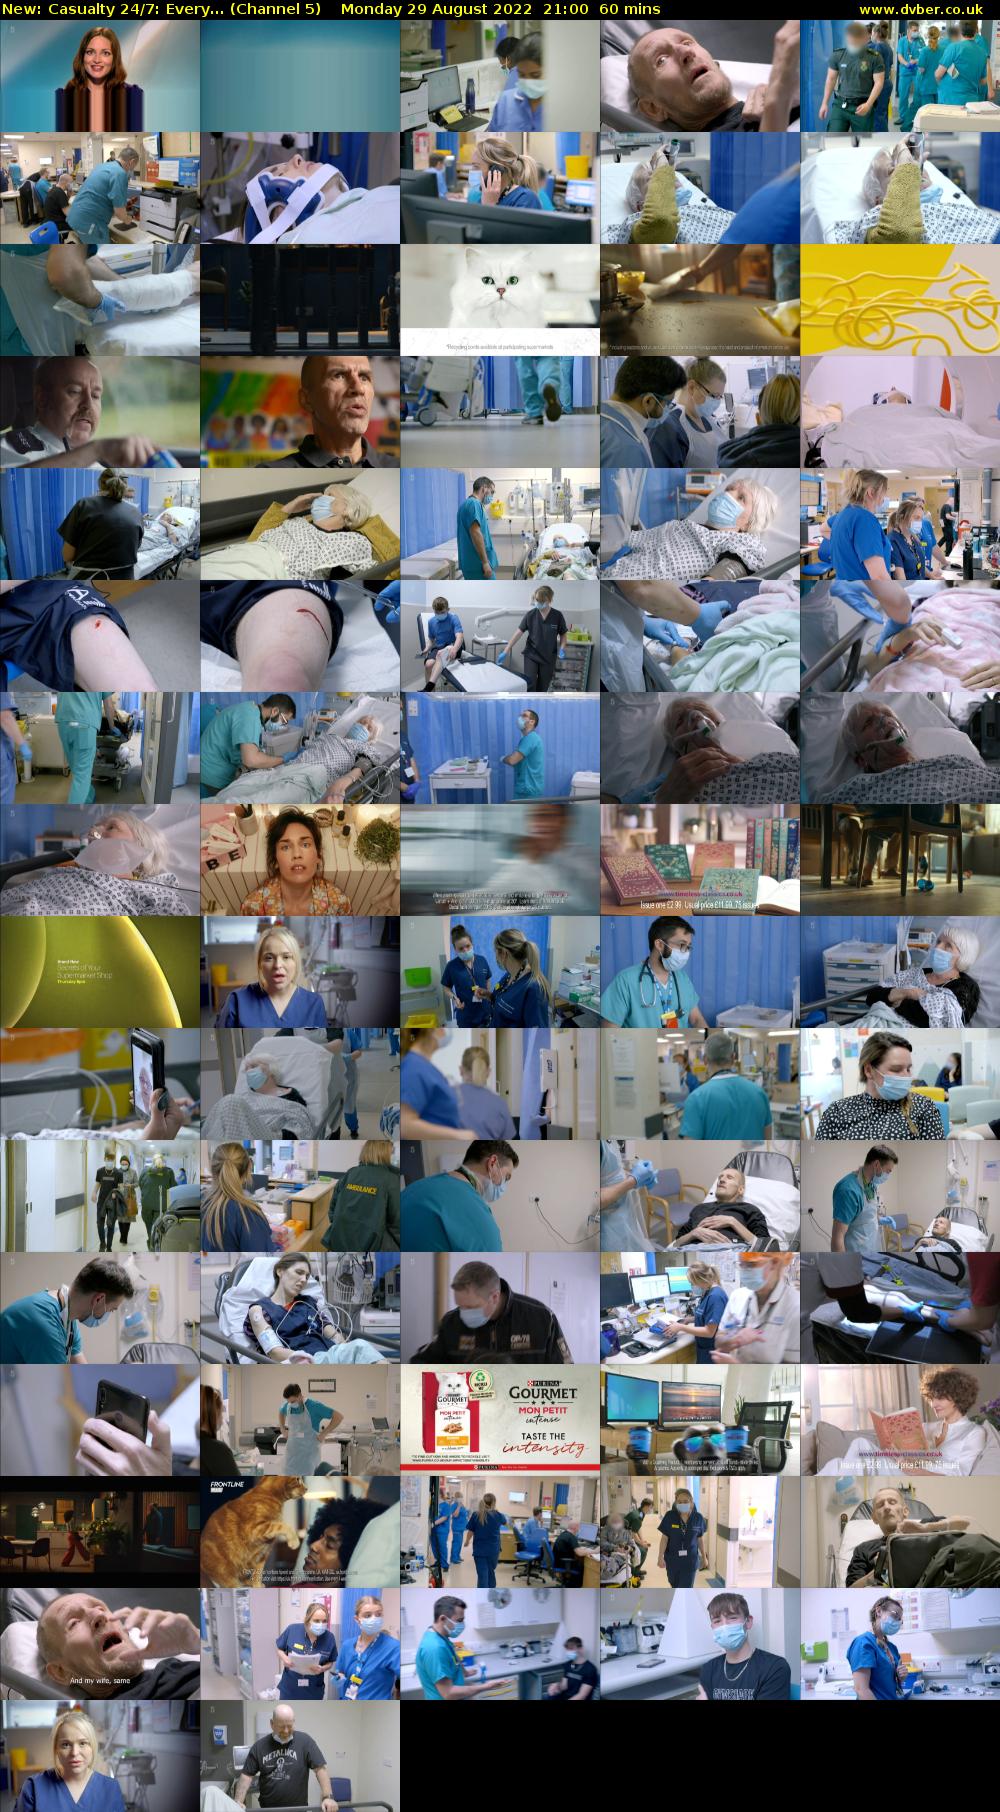 Casualty 24/7: Every... (Channel 5) Monday 29 August 2022 21:00 - 22:00